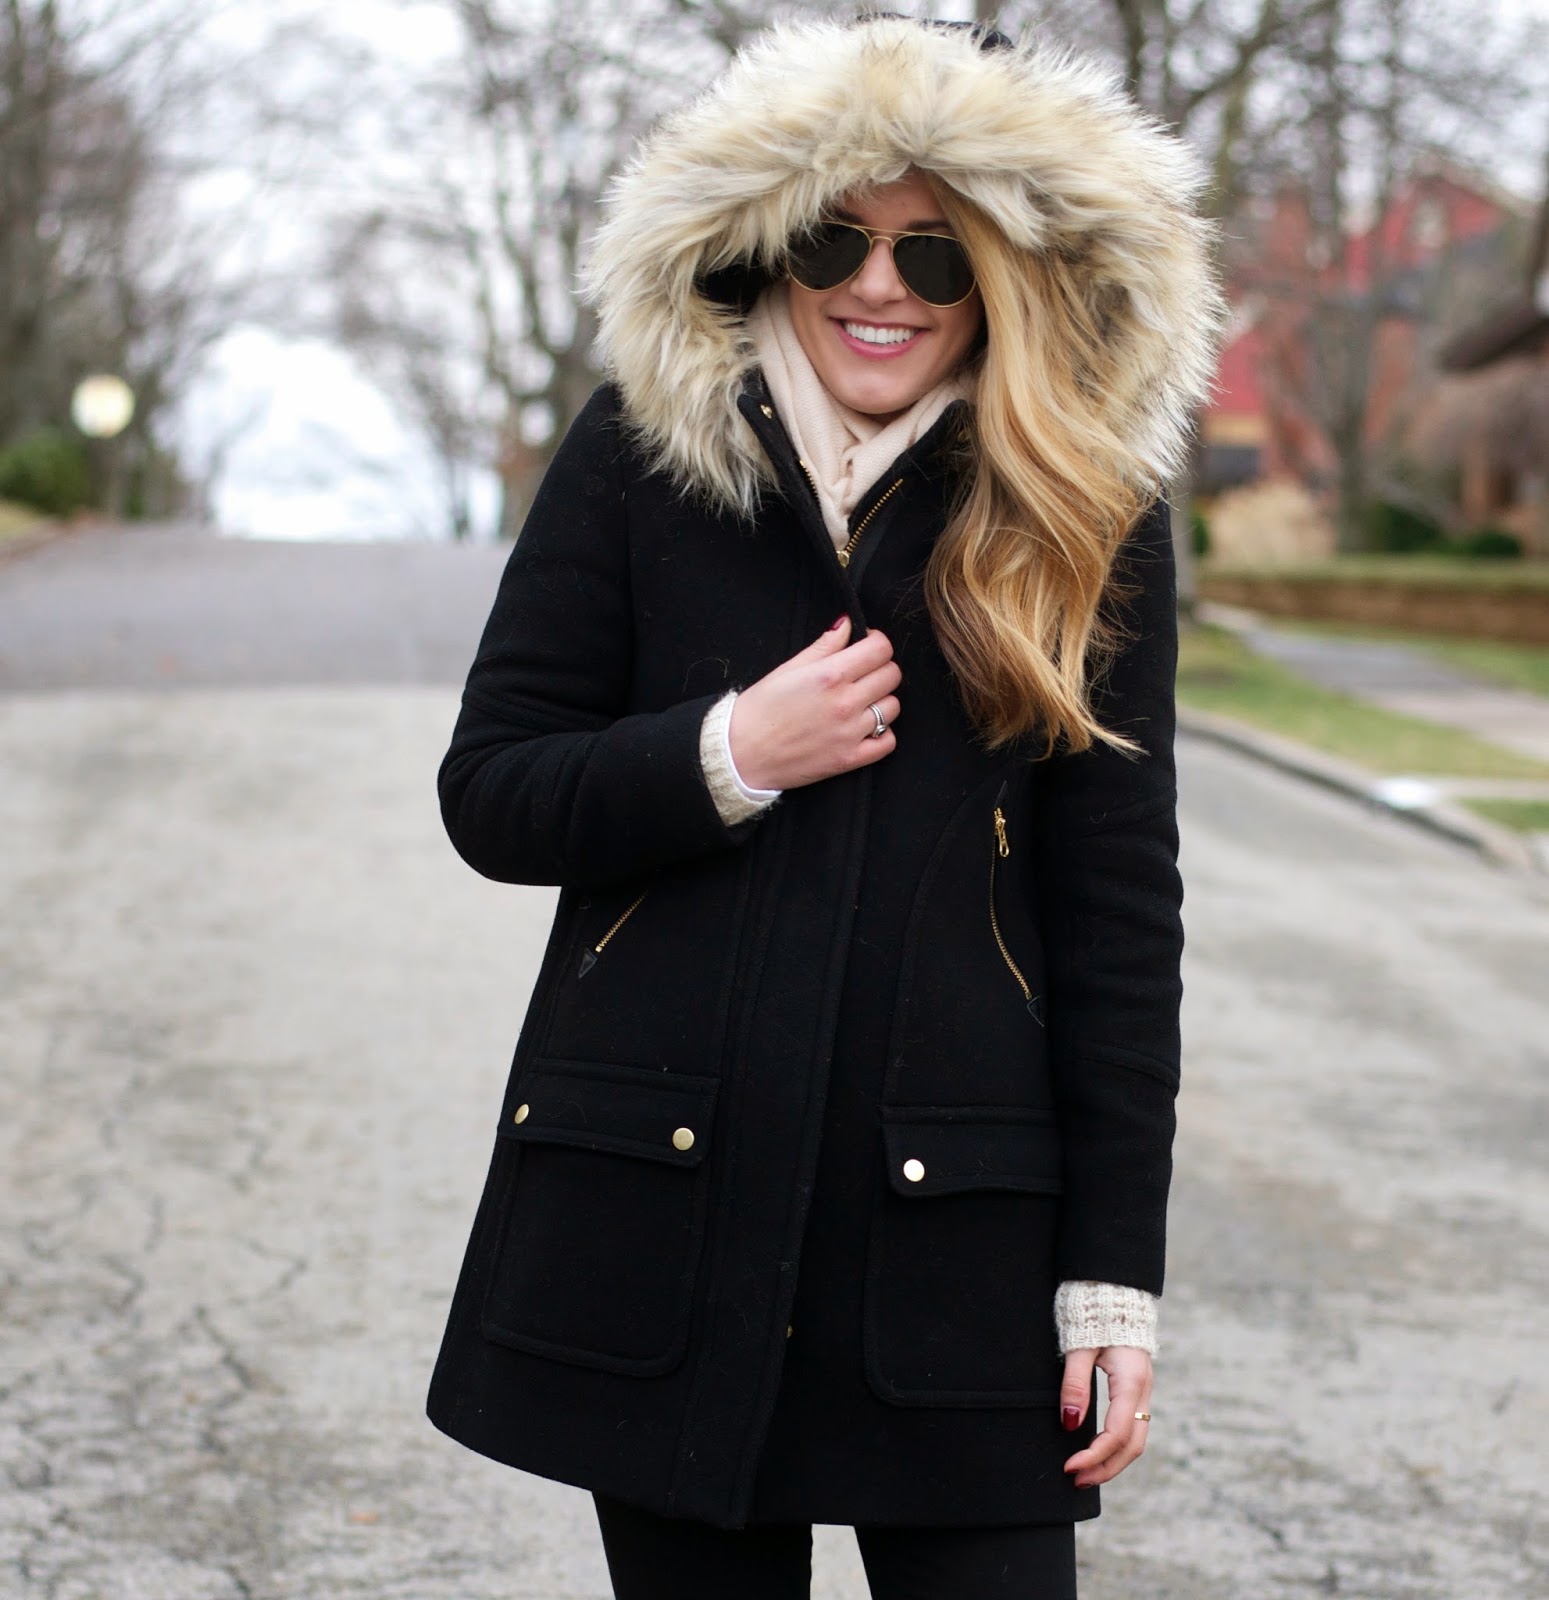 Summer Wind: Winter Layers ft. J. Crew Chateau Parka